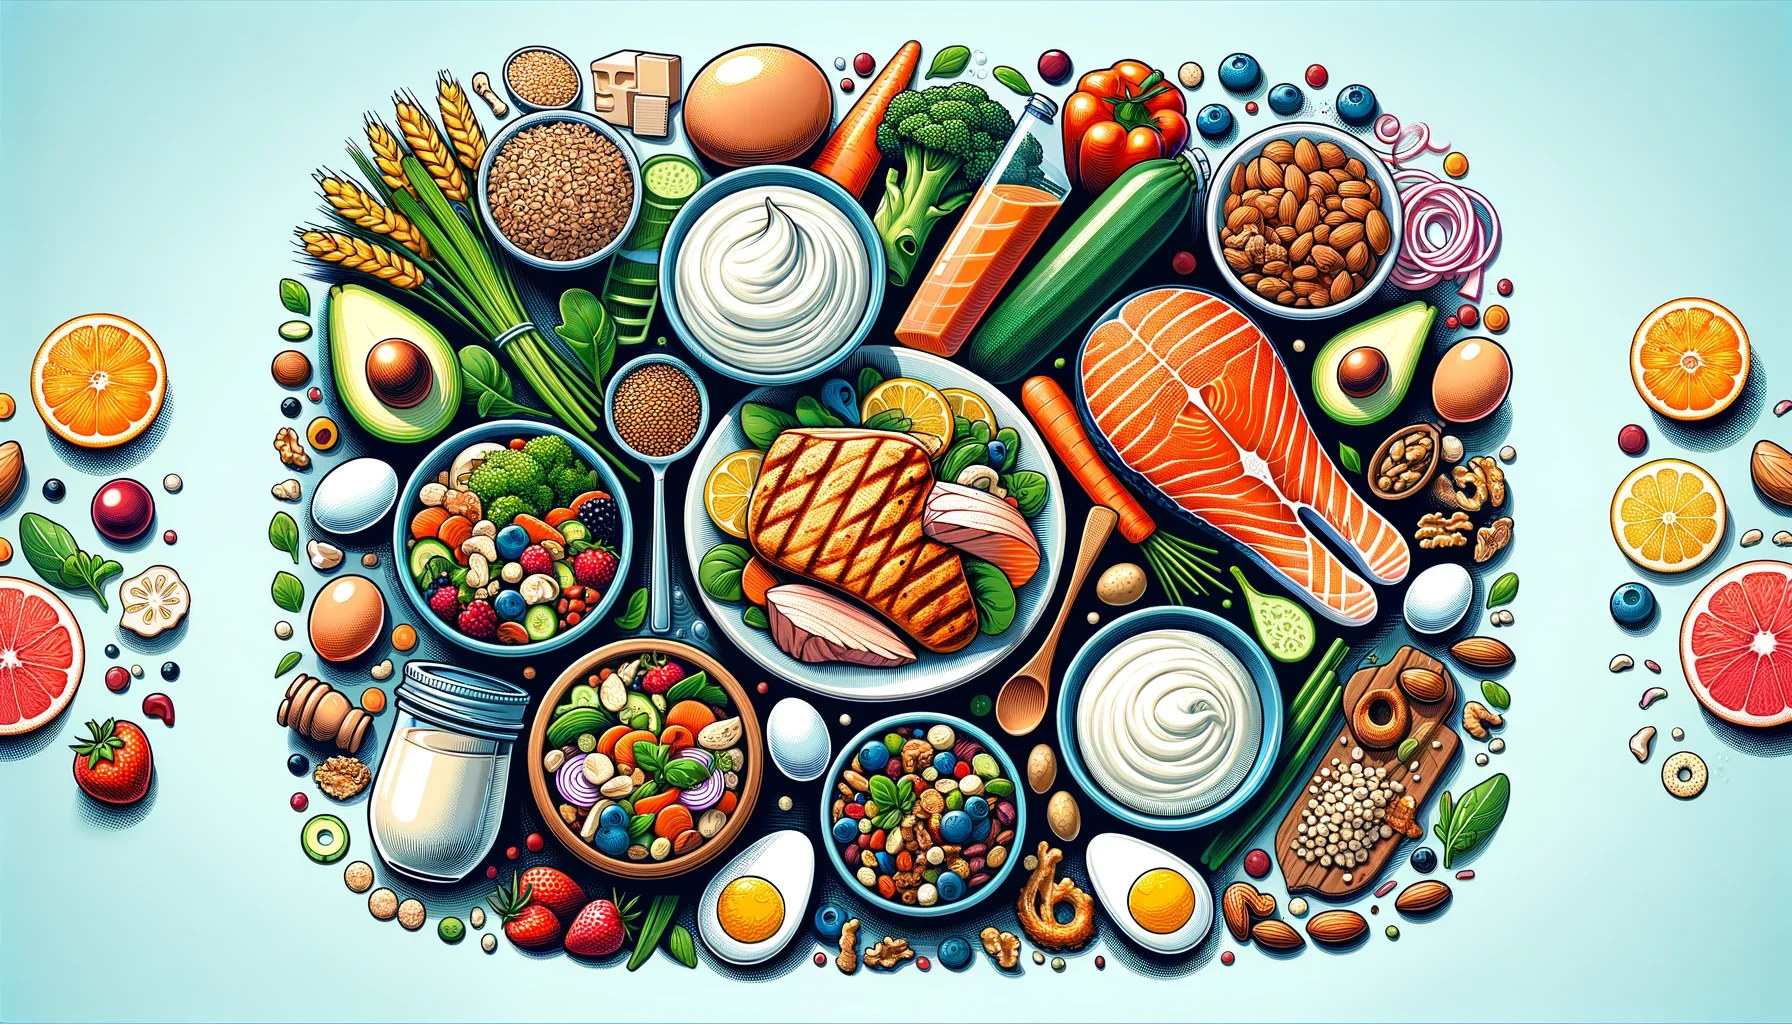 A visually appealing and informative image designed for a blog about a 2100-calorie high-protein meal plan.